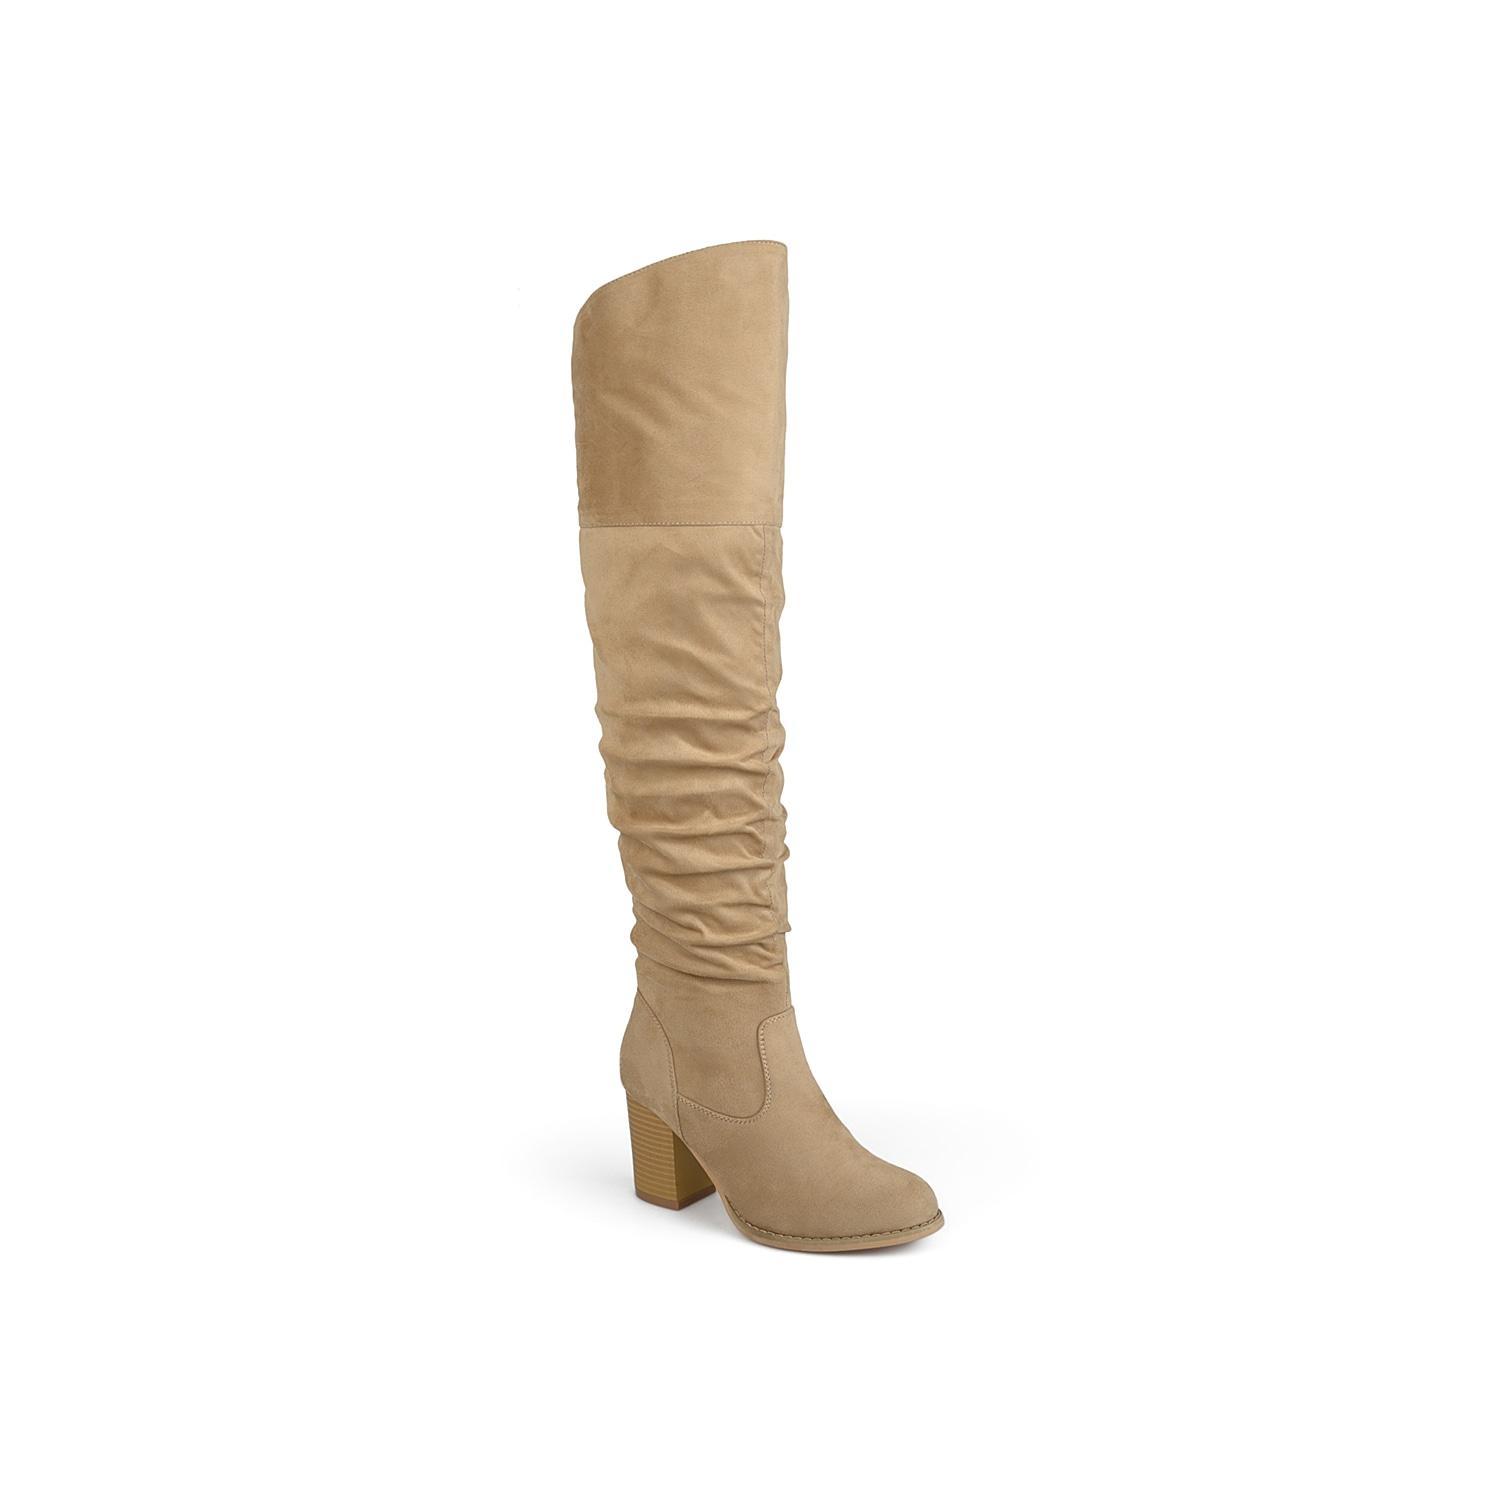 Vince Camuto Vuliann Knee High Boot Product Image